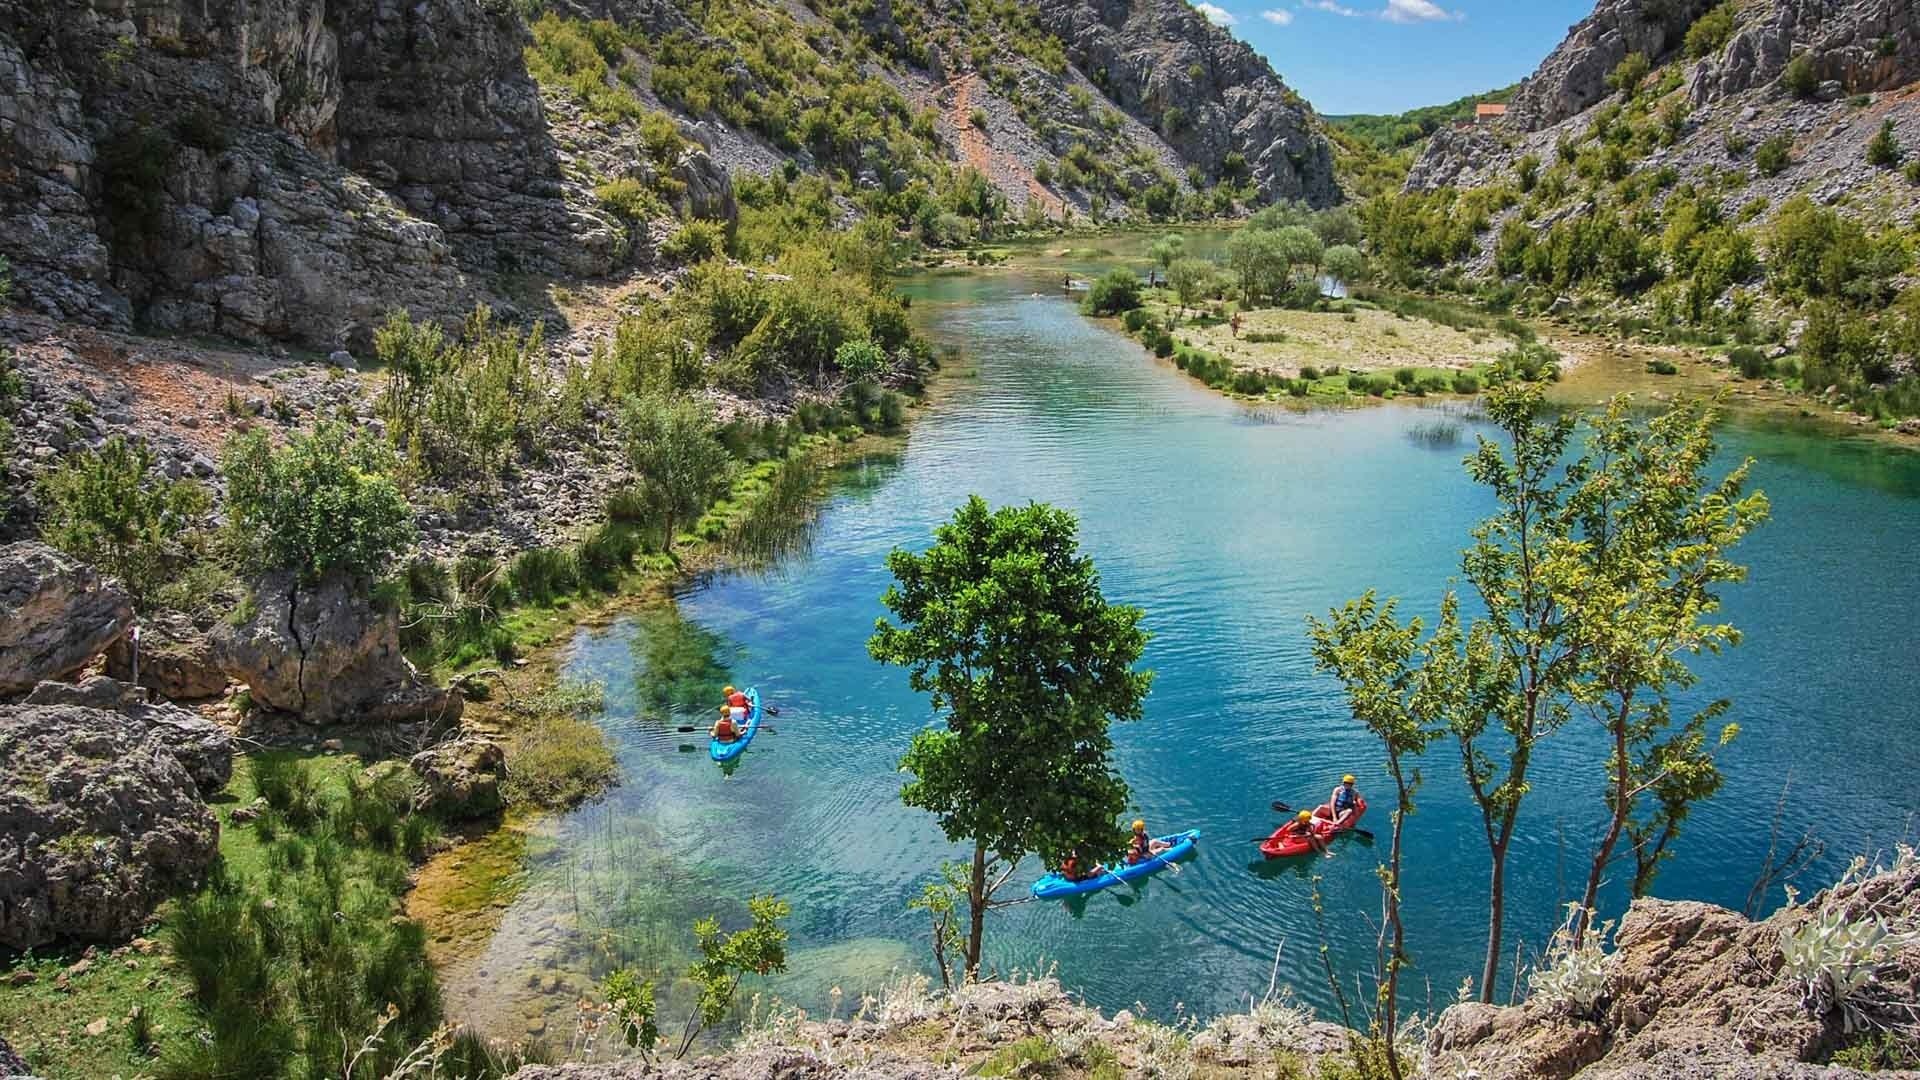 Kayakers in a clear turquoise river in Croatia's Dalmatia Region.